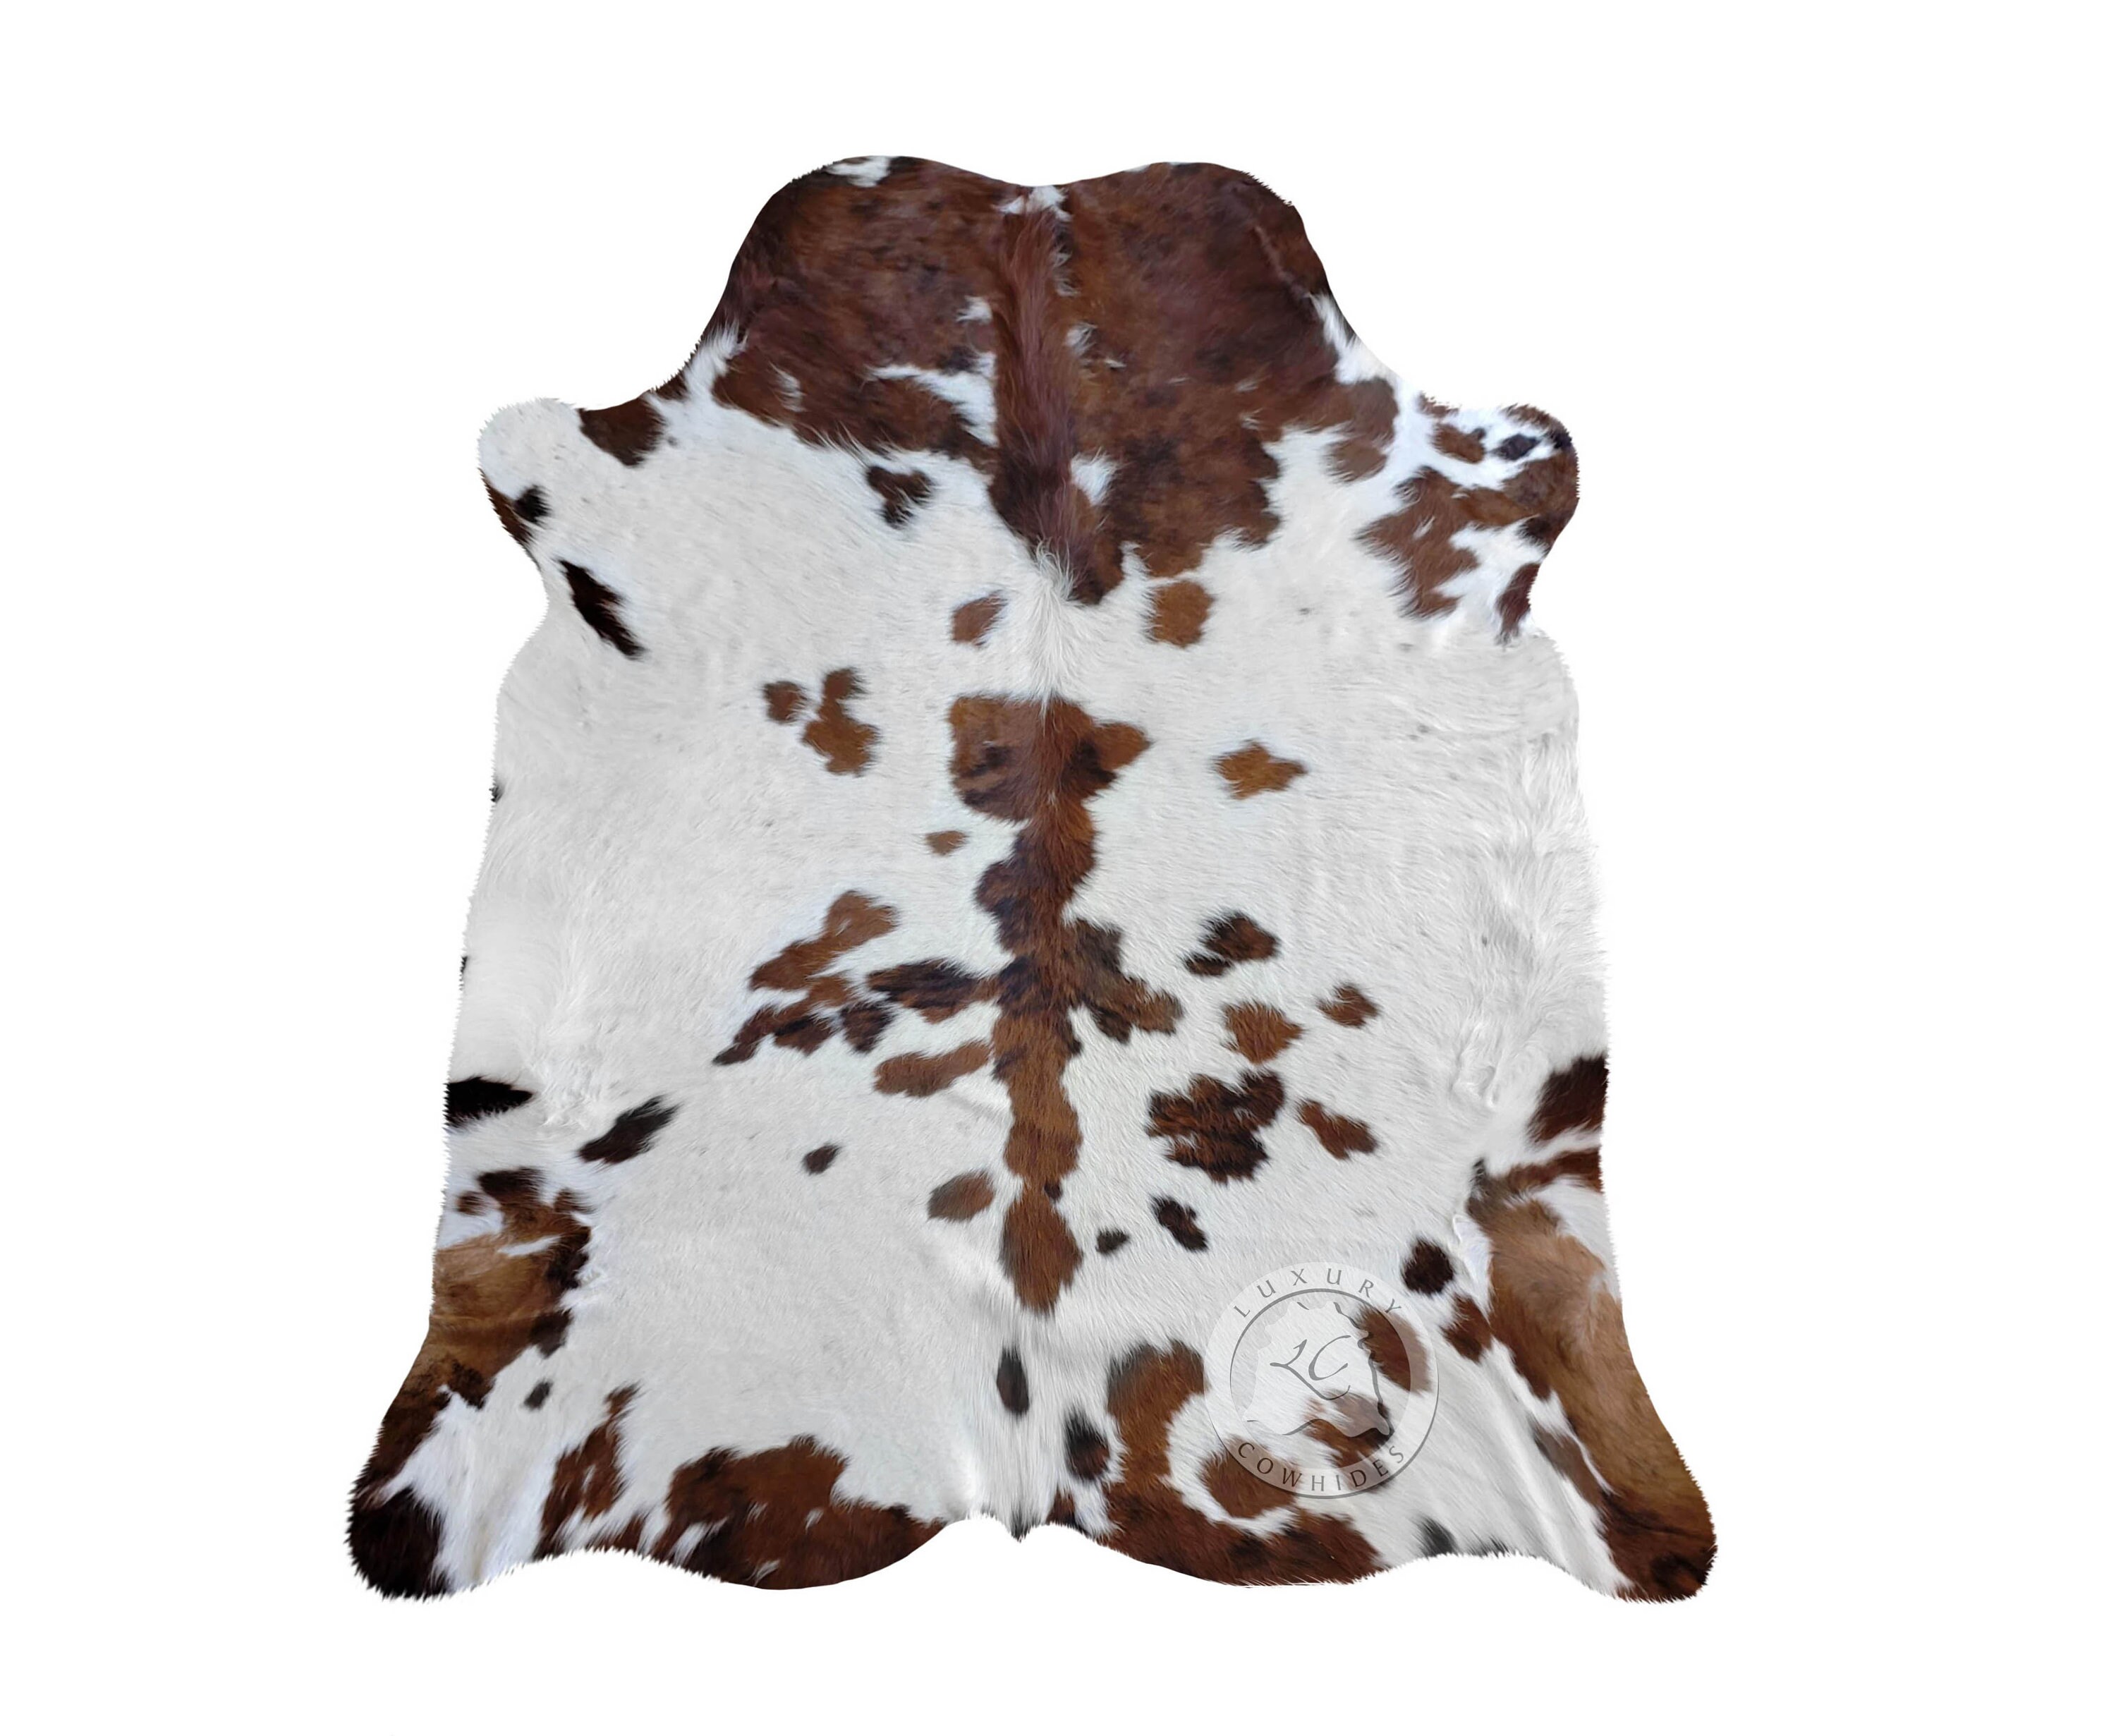 Tricolor Cowhide Rug Authentic Leather Rug with Hair on by Original Cowhide 